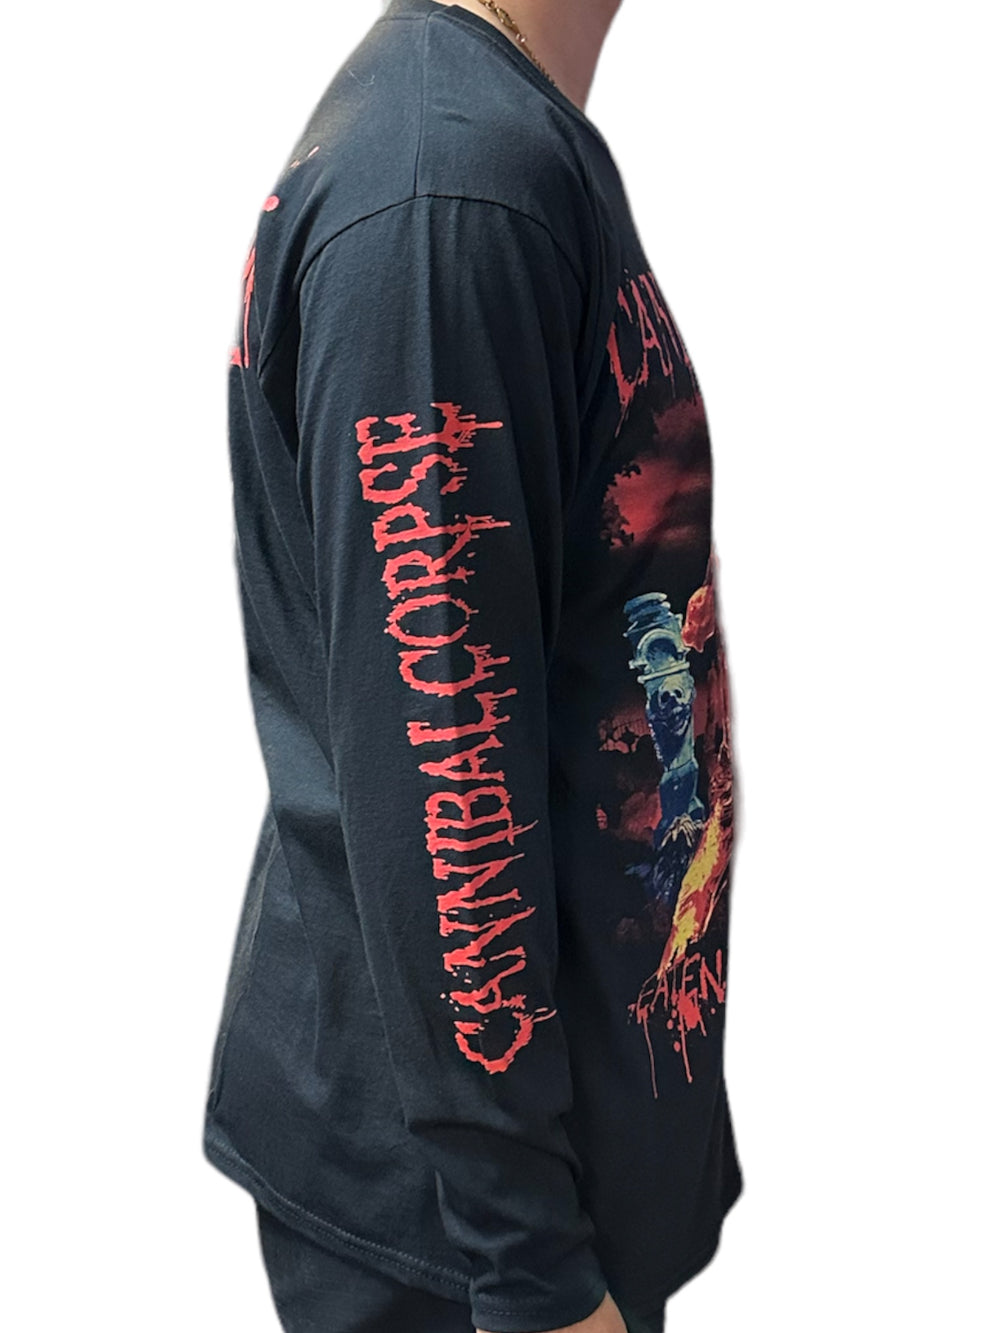 Cannibal Corpse Eaten Official Unisex Long Sleeved Shirt Various Sizes Front & Back Print: NEW